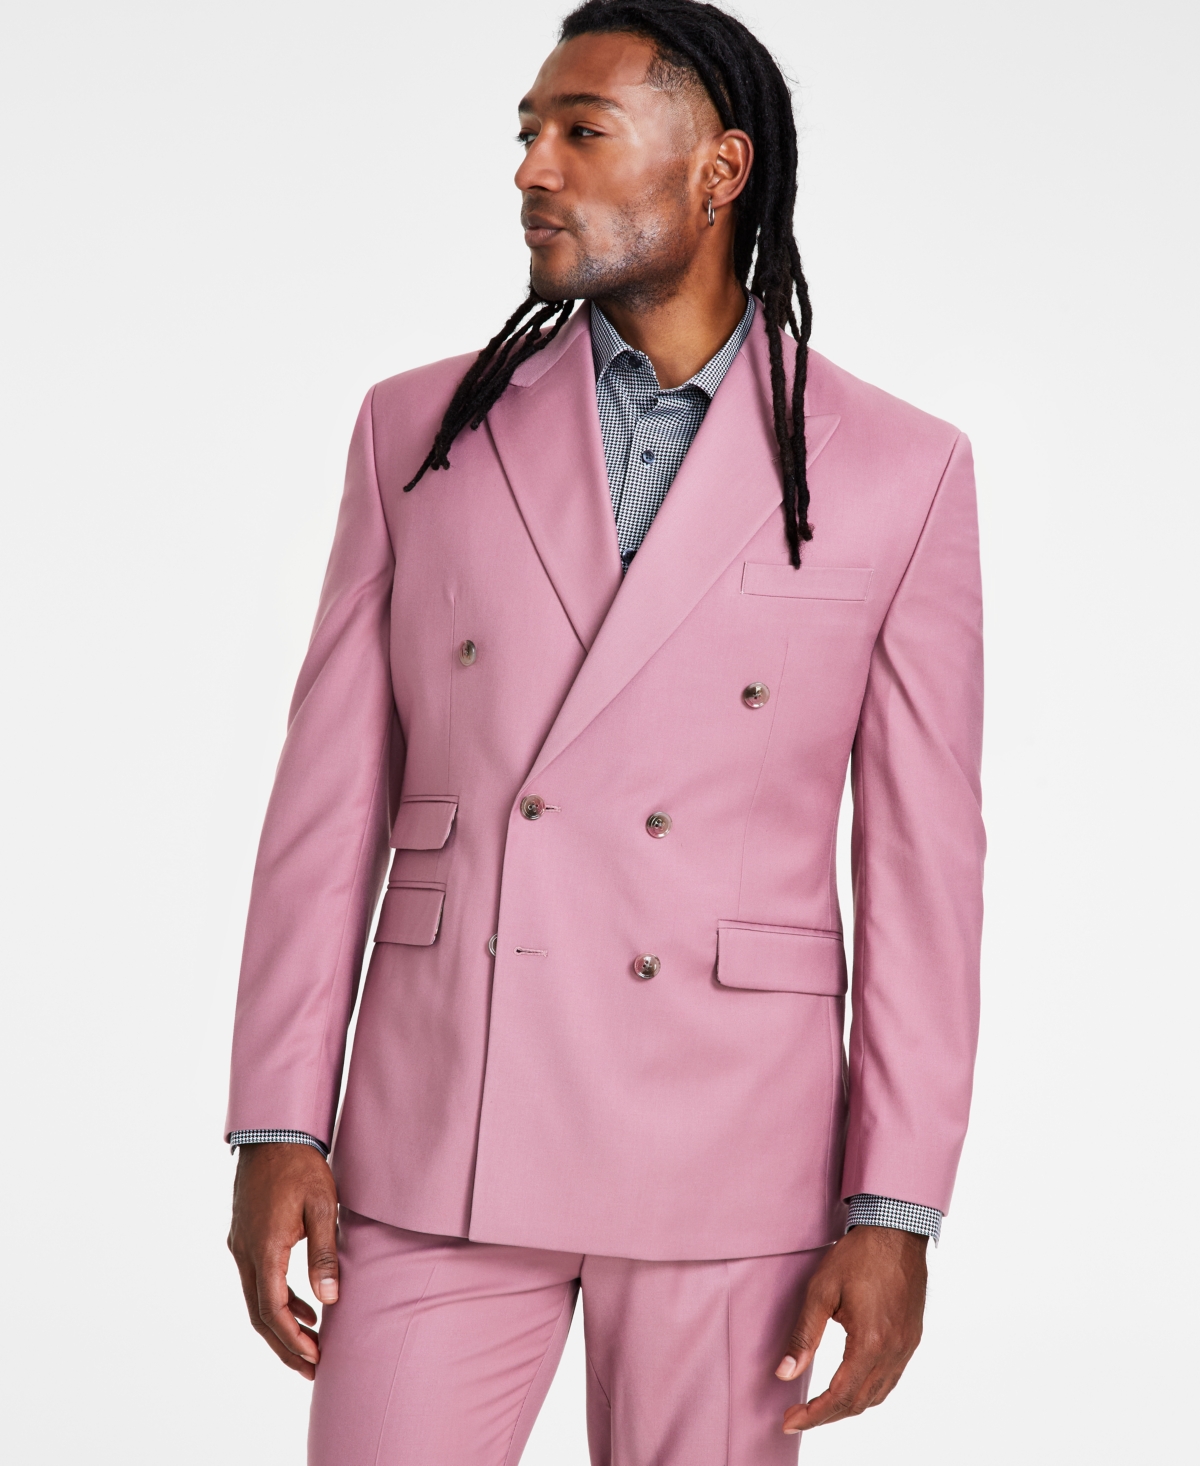 Men's Classic-Fit Solid Double-Breasted Suit Jacket - Mauve Solid